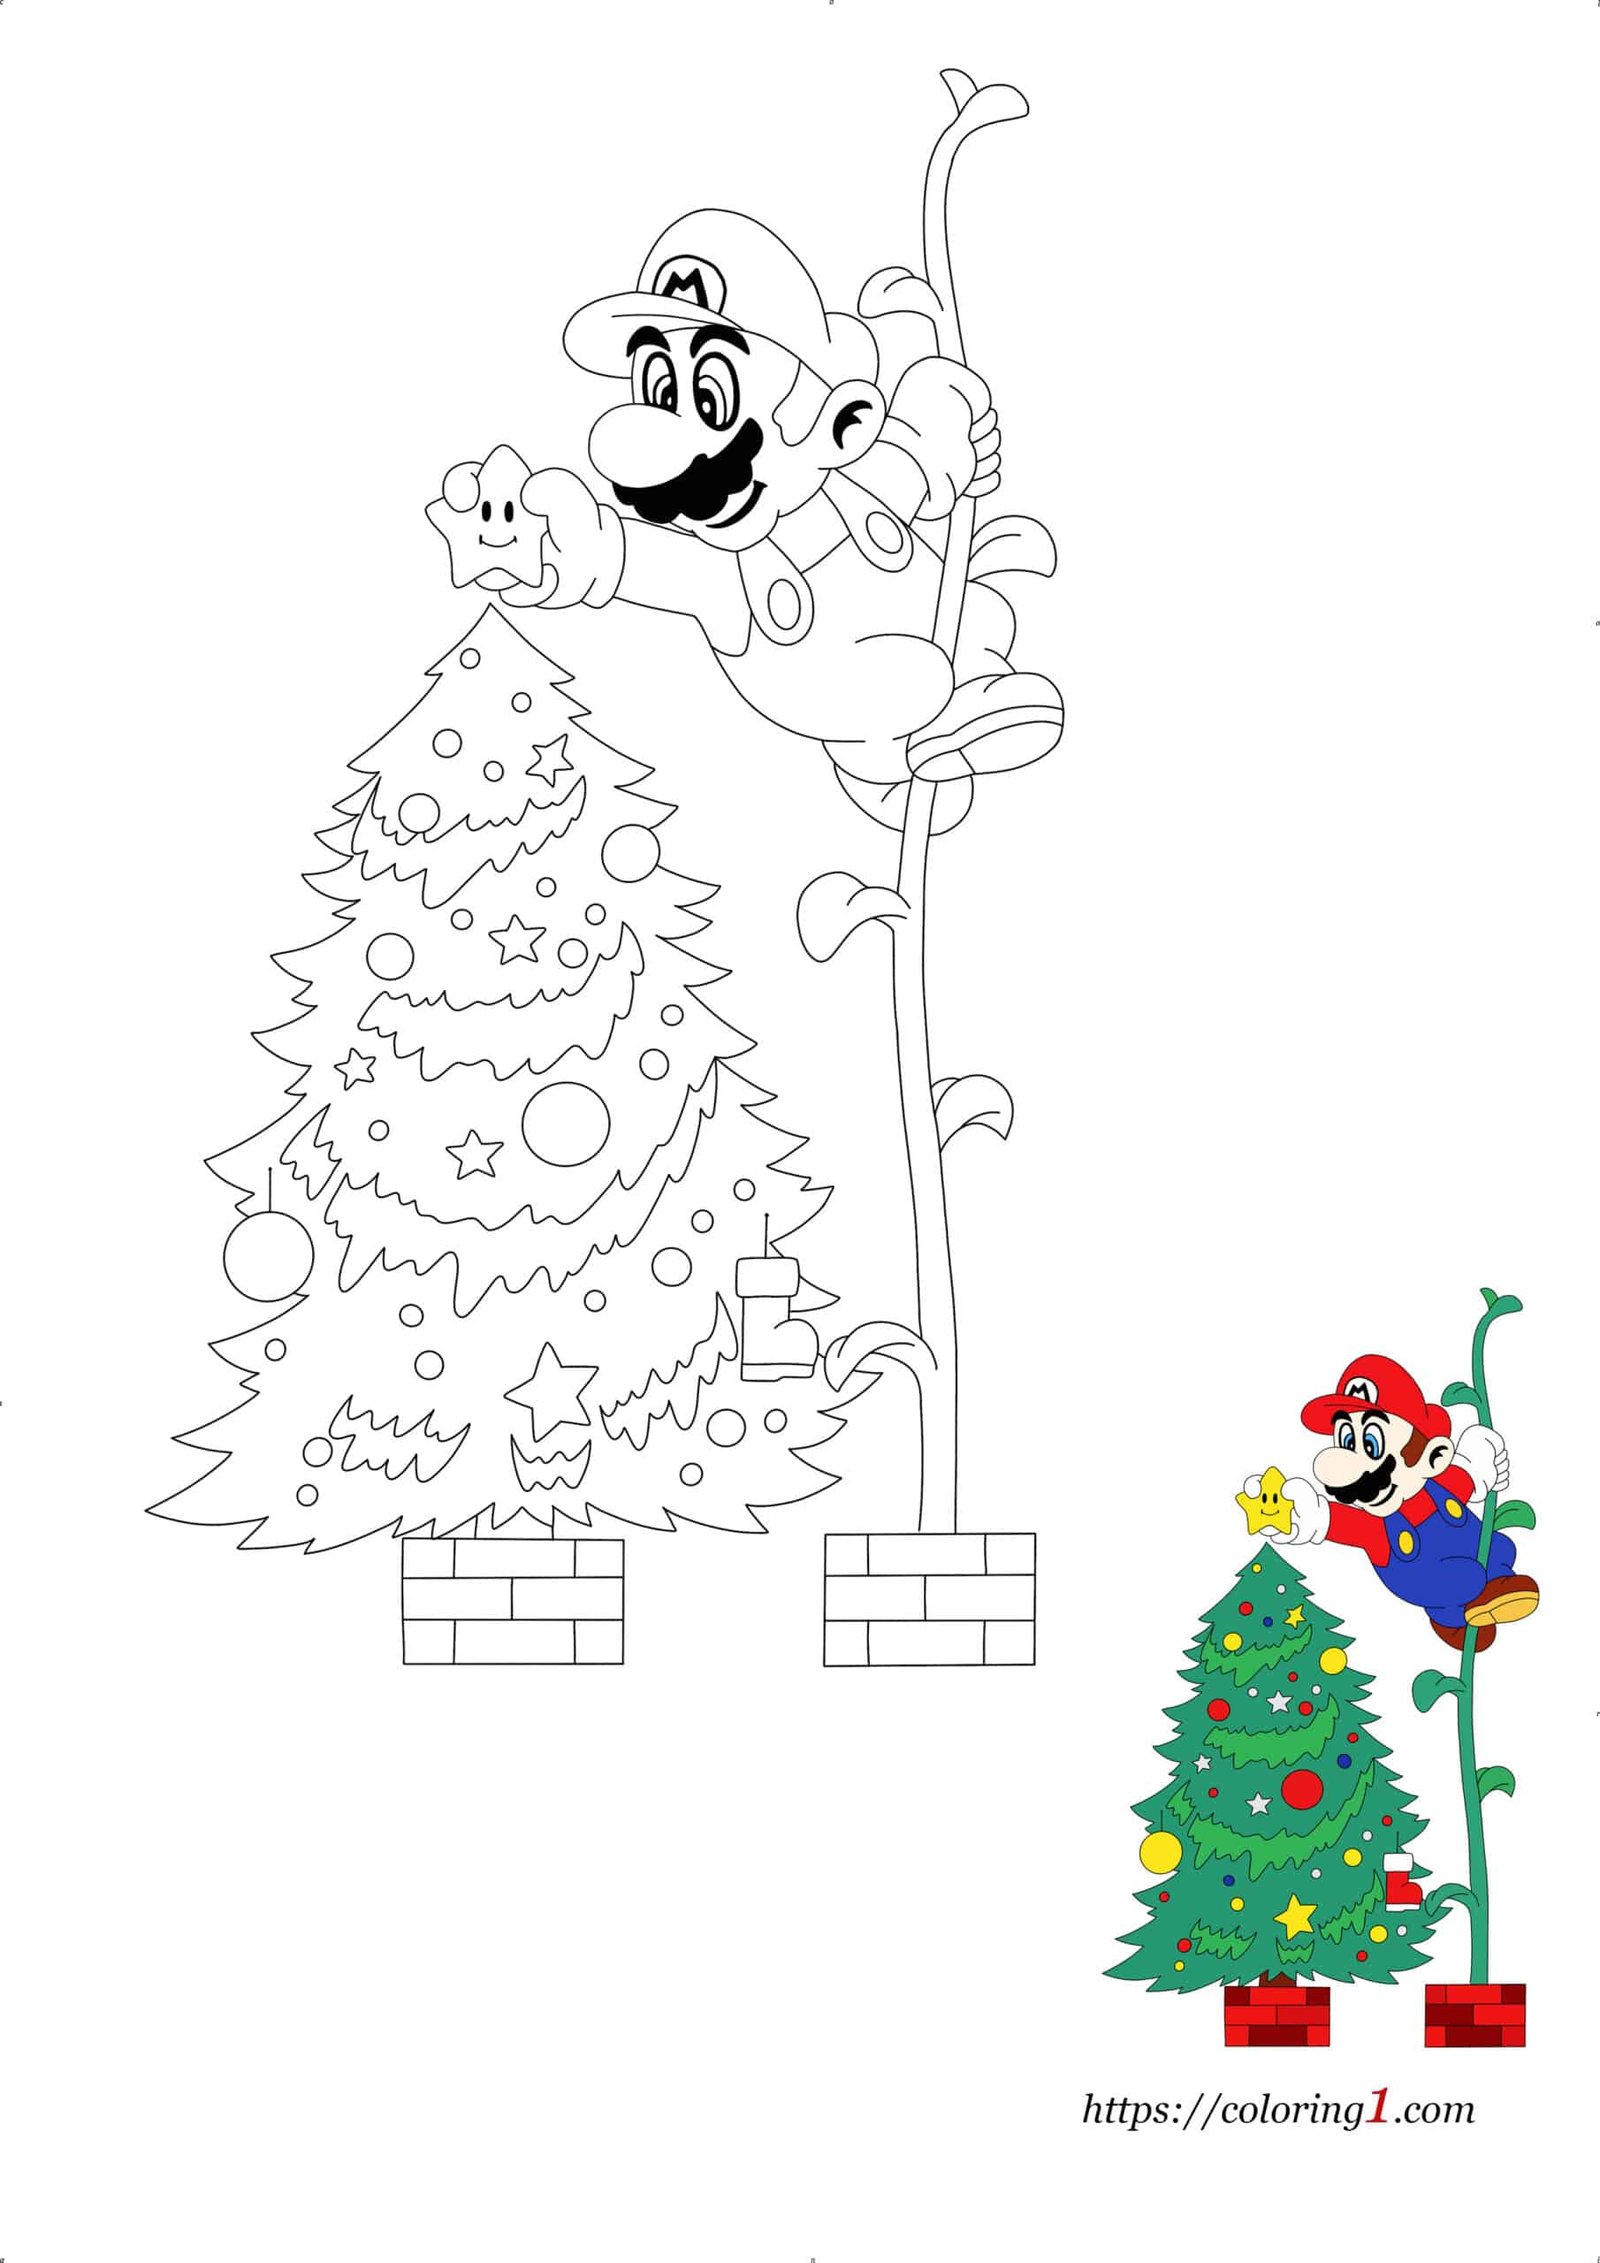 Mario Christmas Tree coloring book page to print online